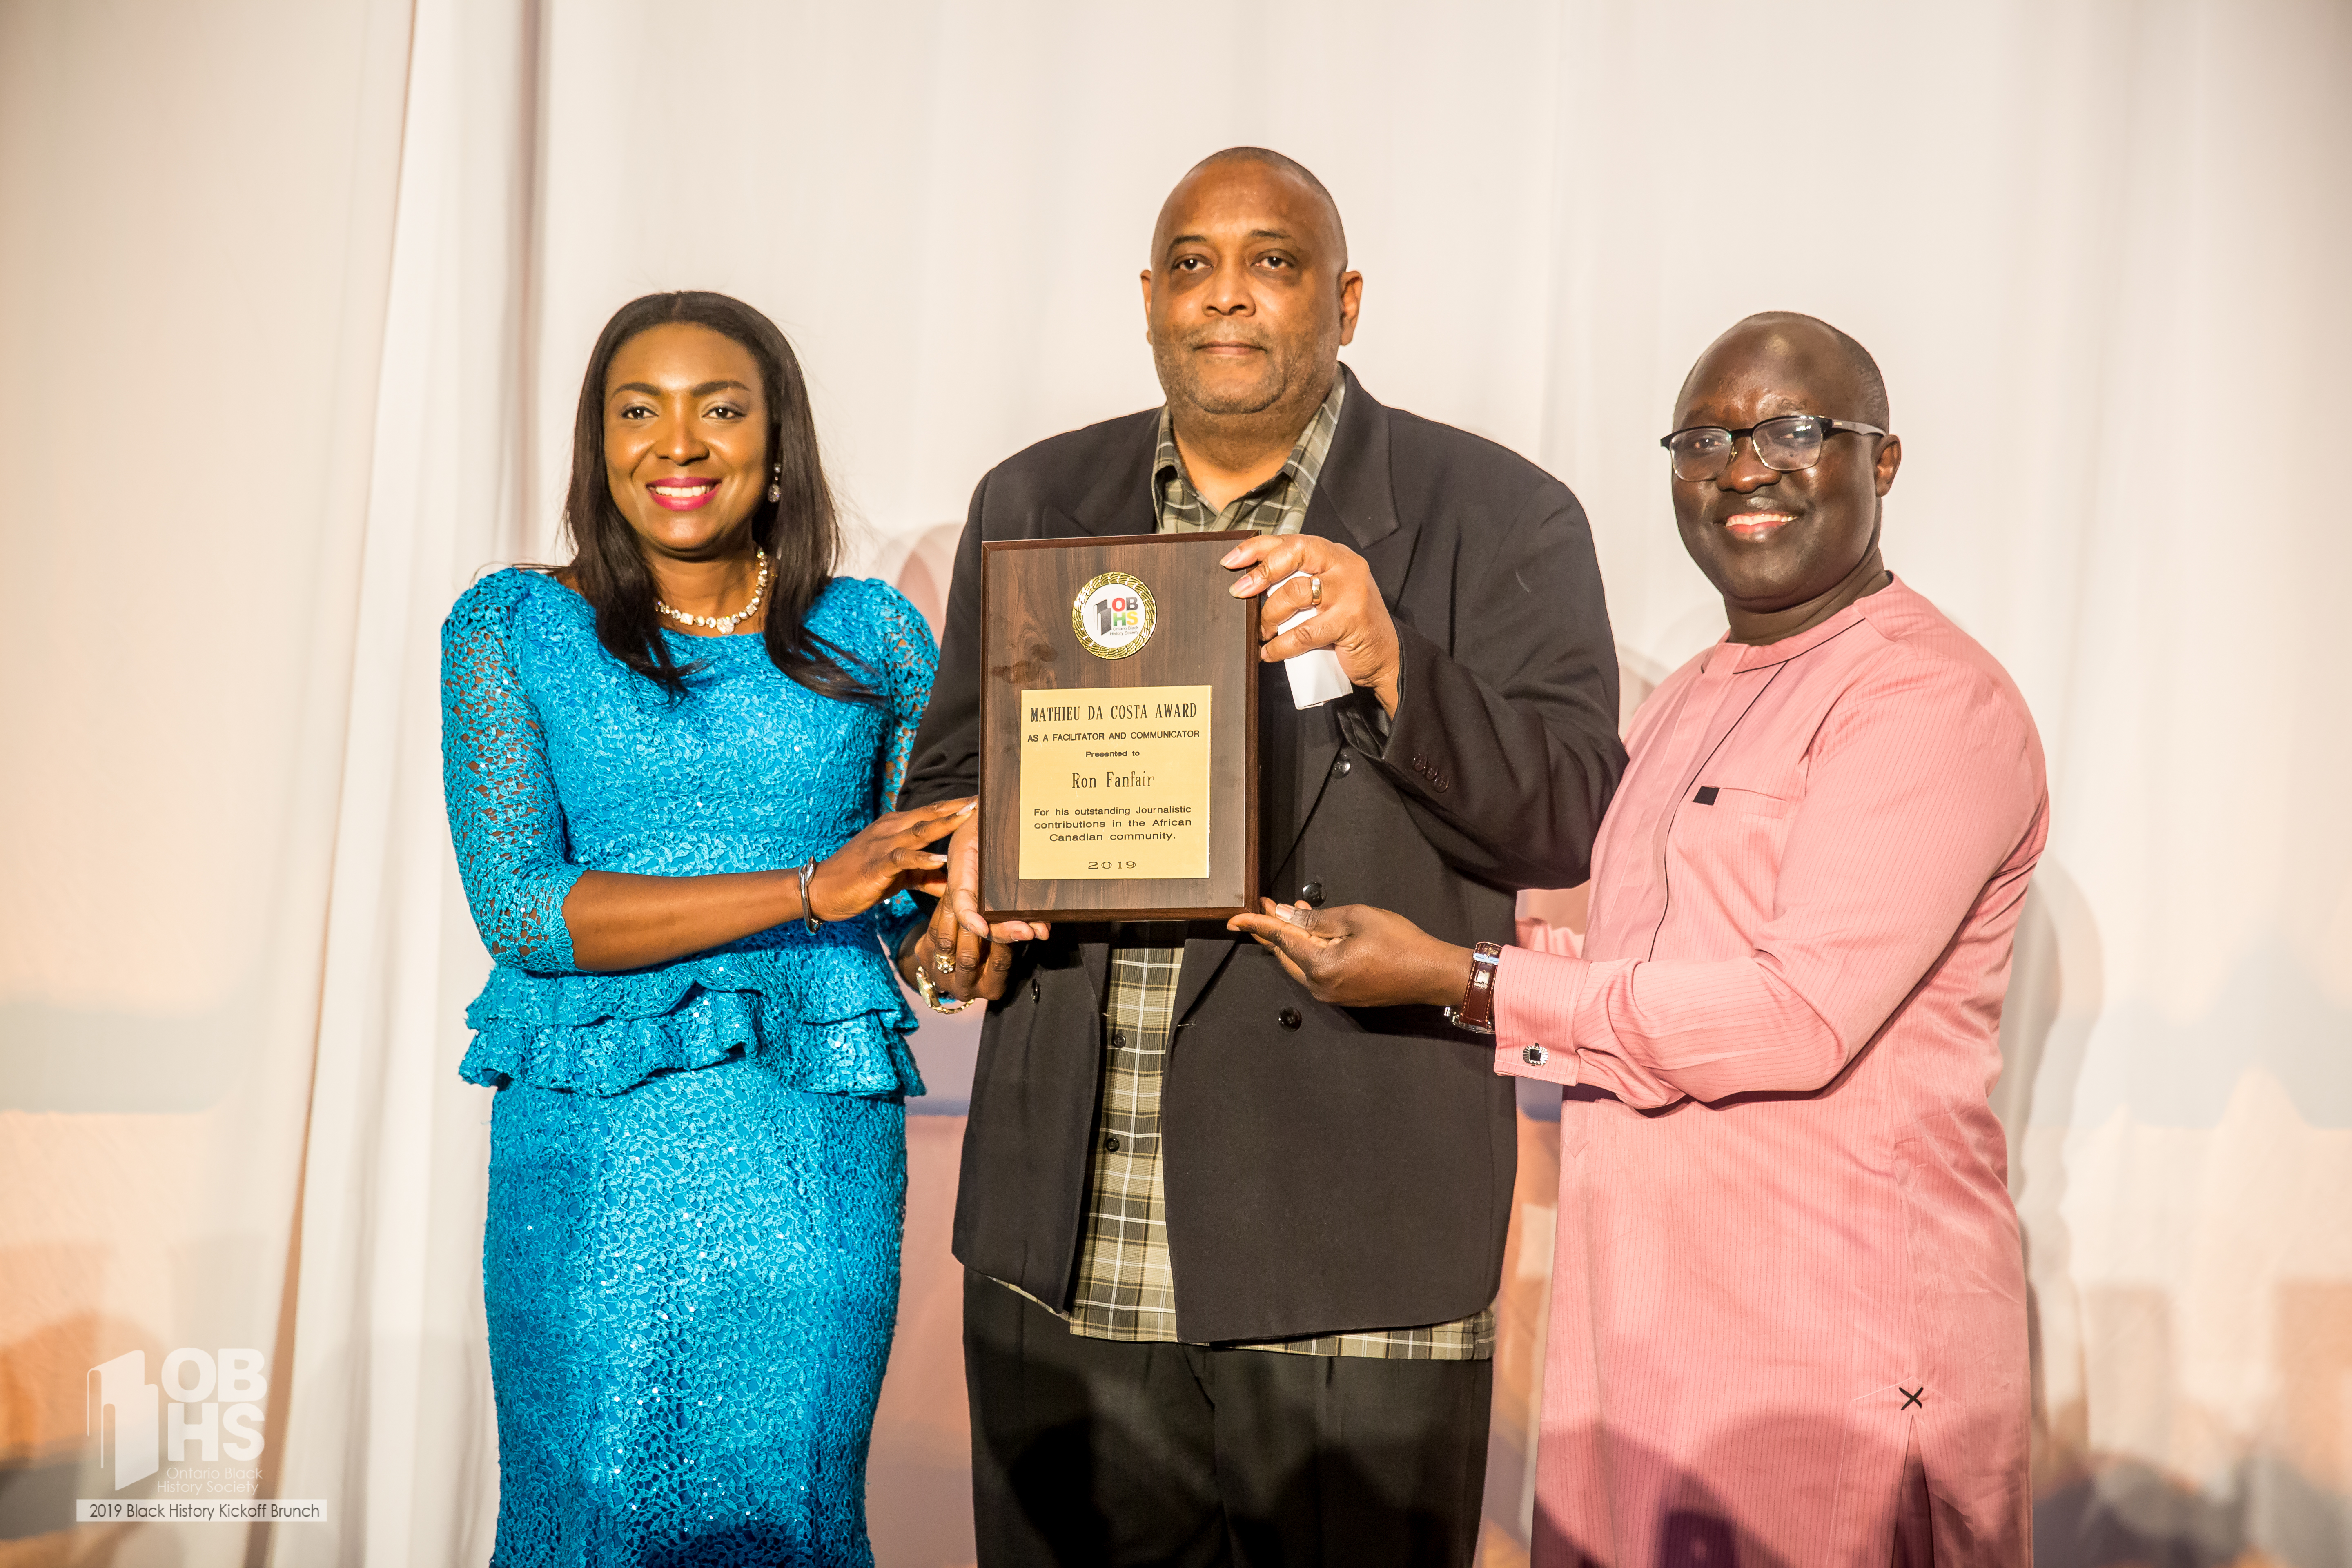 Patricia Bebia Mawa and Moses Mawa present award winner Ron Fanfair with his plaque- photo by www.sayhilondon.com